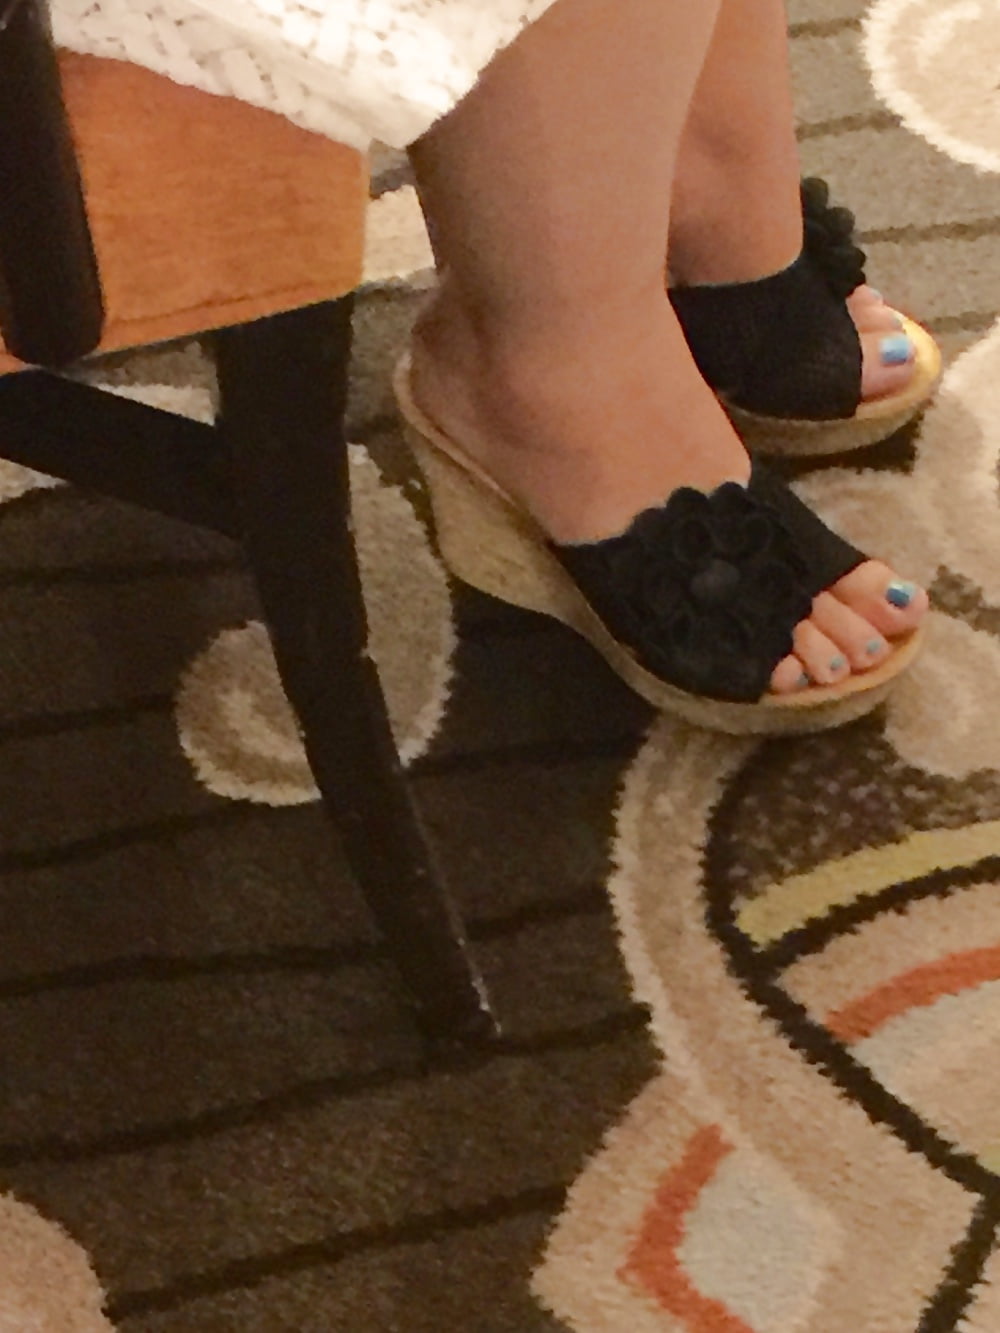 Wife's sexy feet in wedges playing in Vegas porn gallery